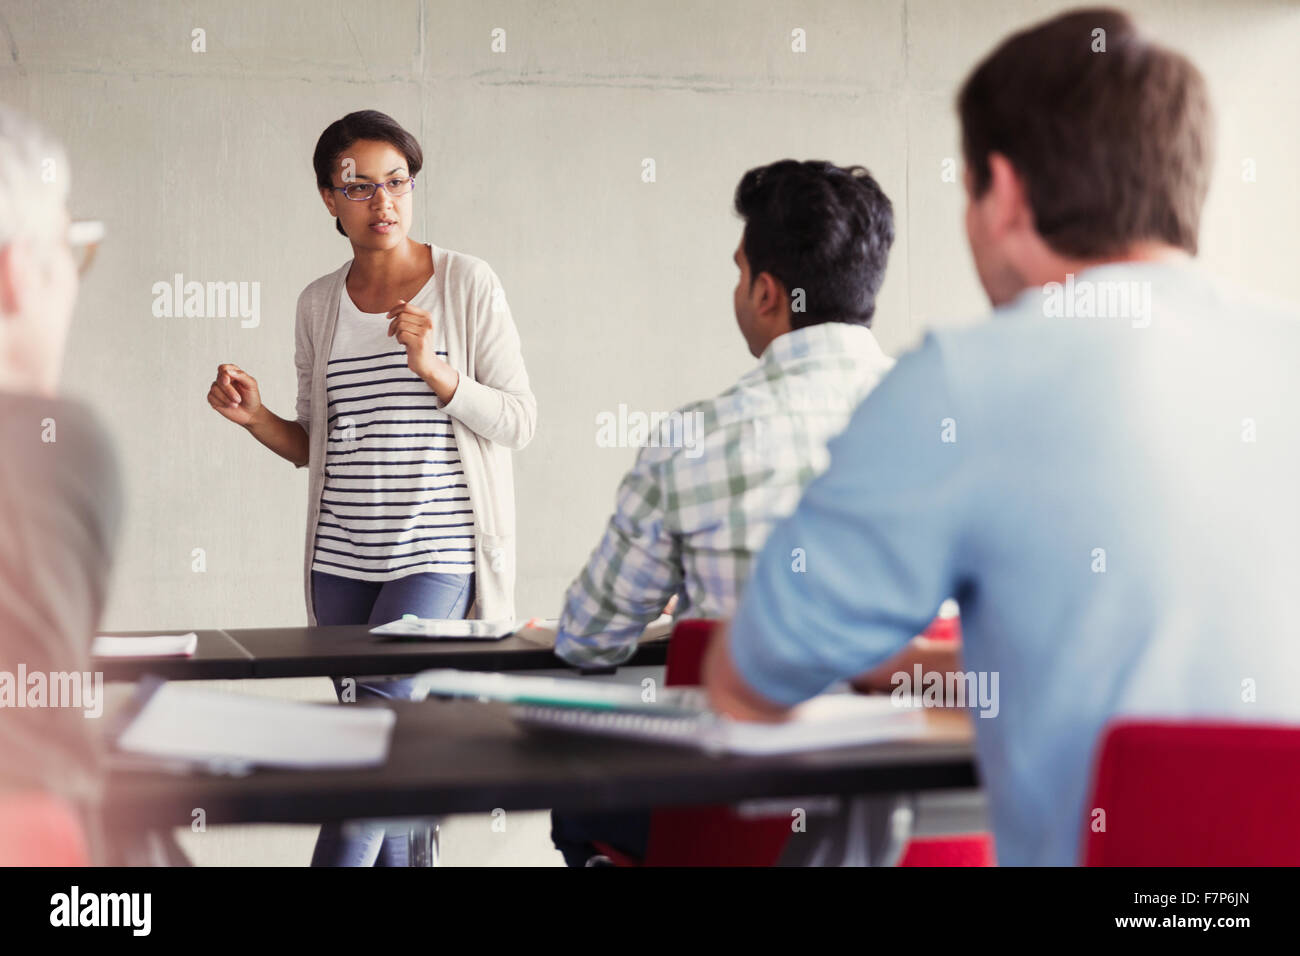 Teacher speaking to students in adult education classroom Stock Photo